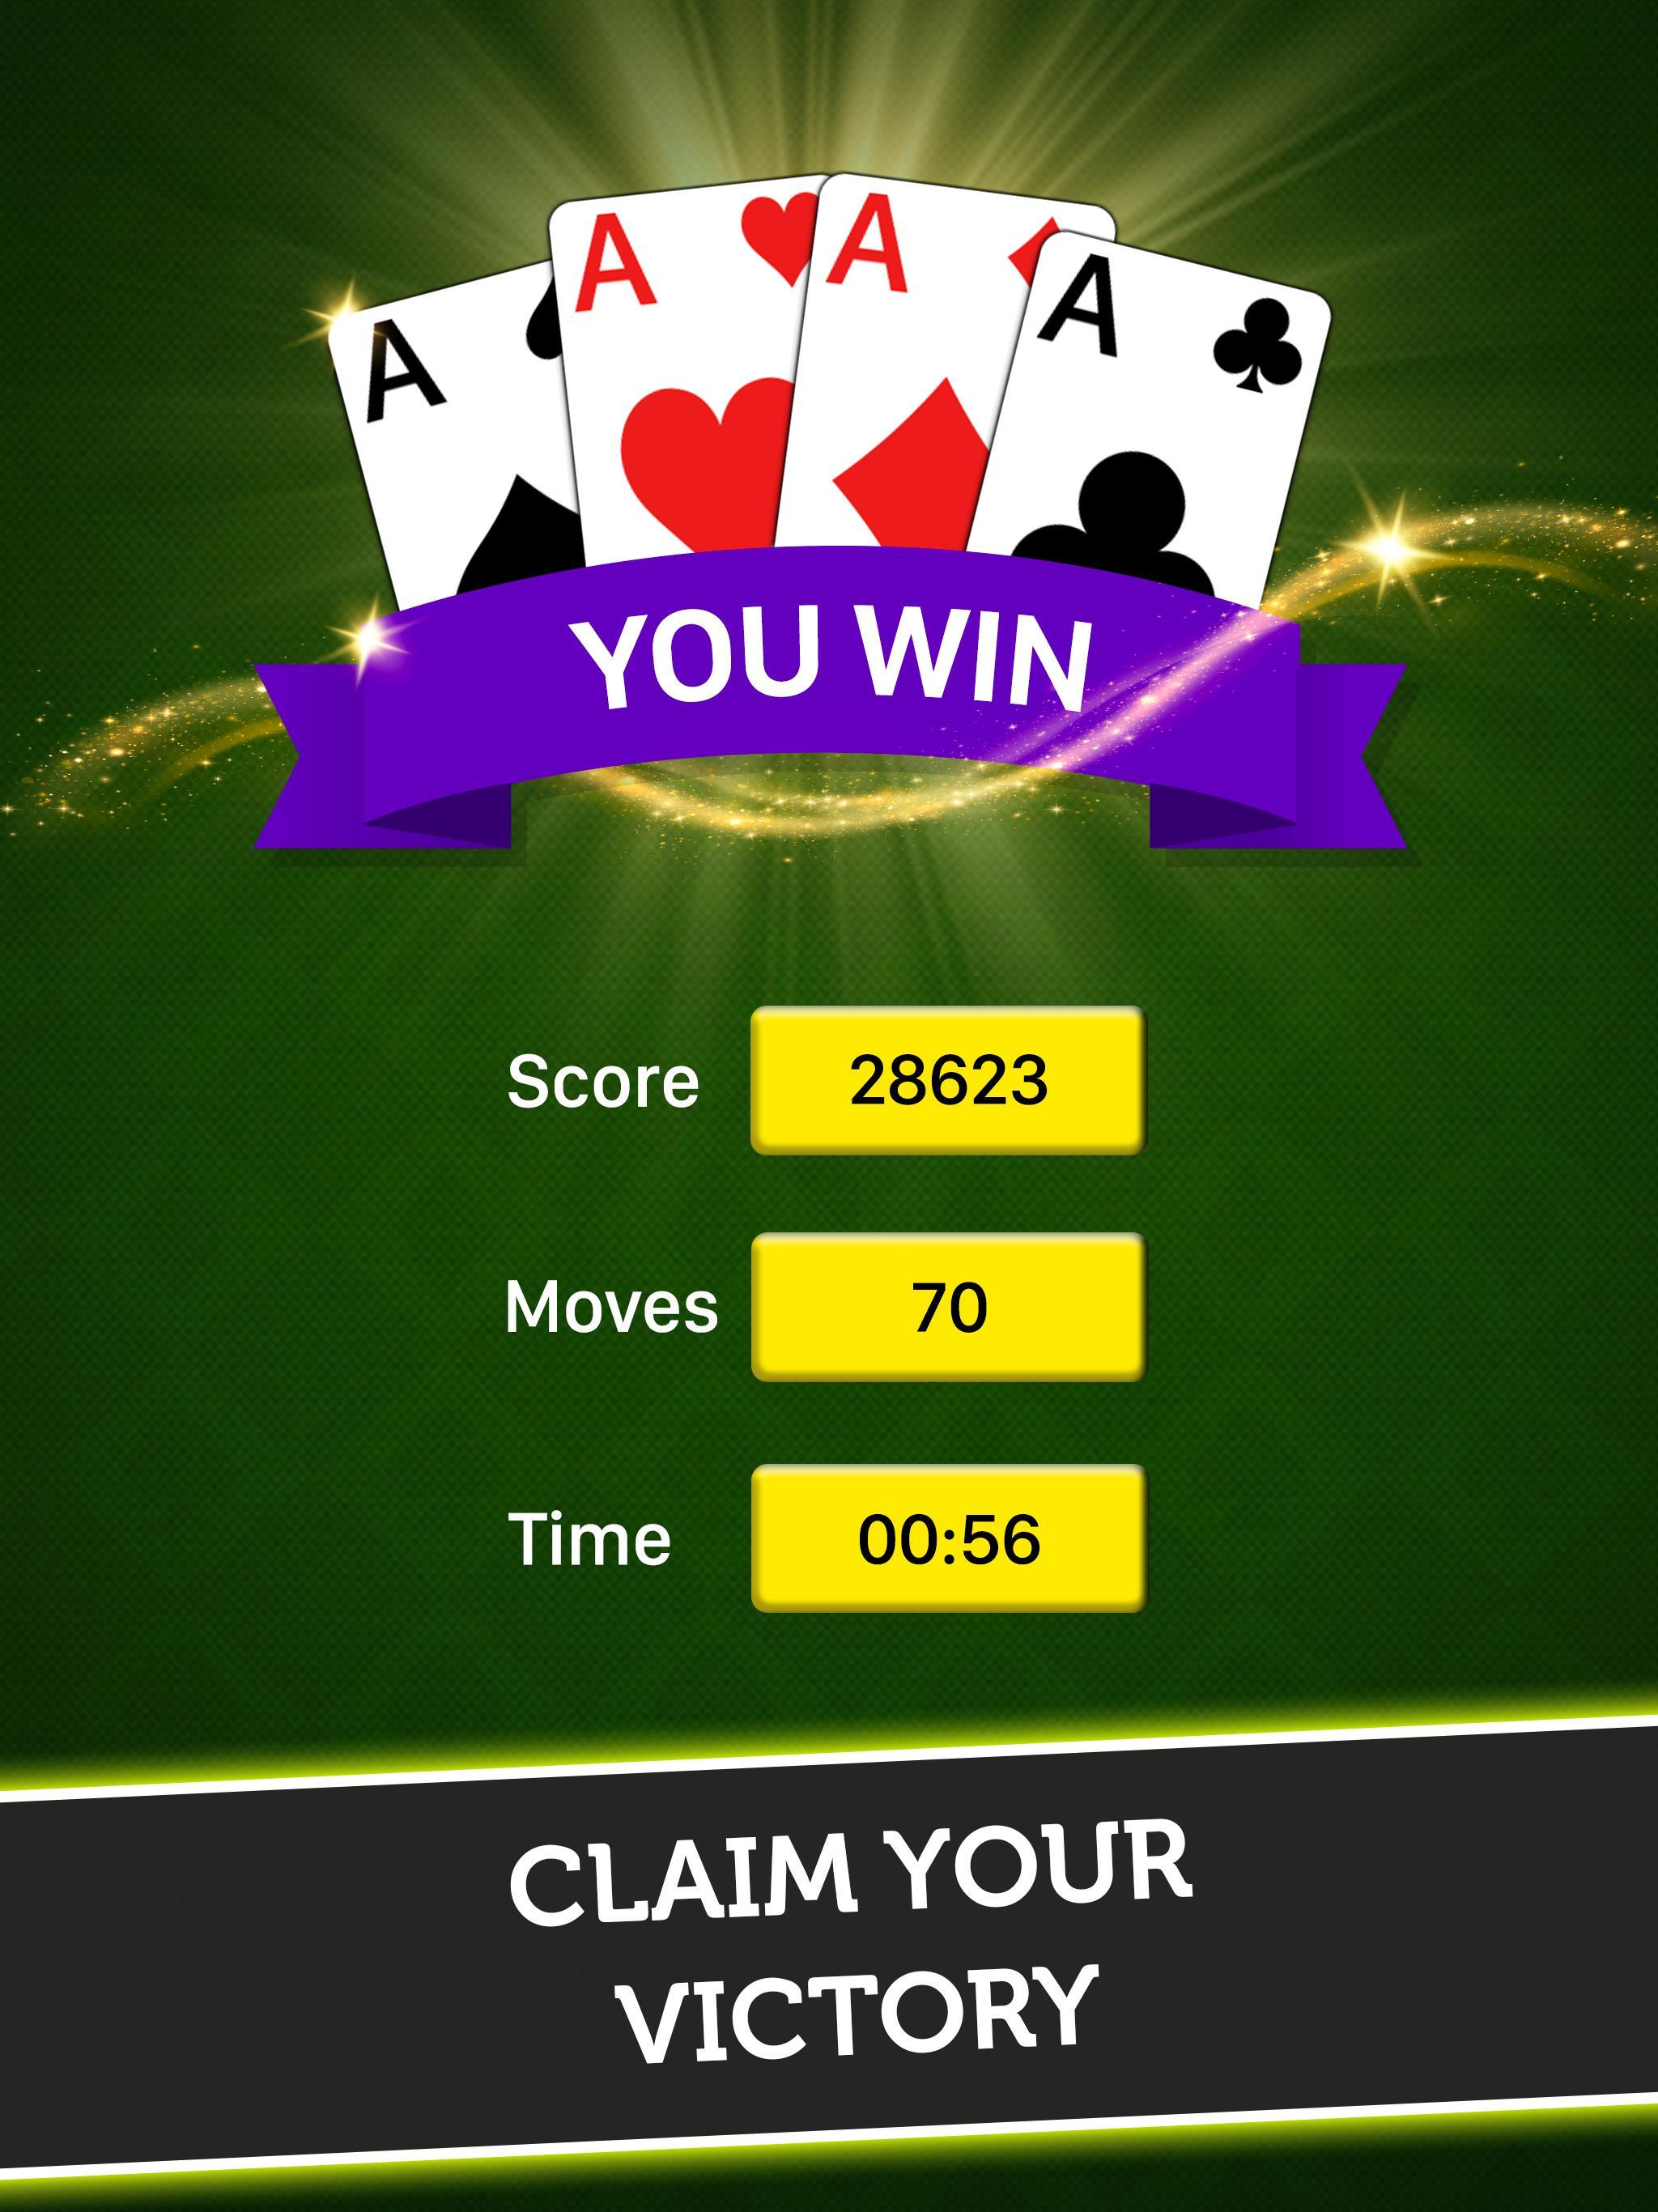 Classic Solitaire 2020 - Free Card Game 1.152.0 Screenshot 8